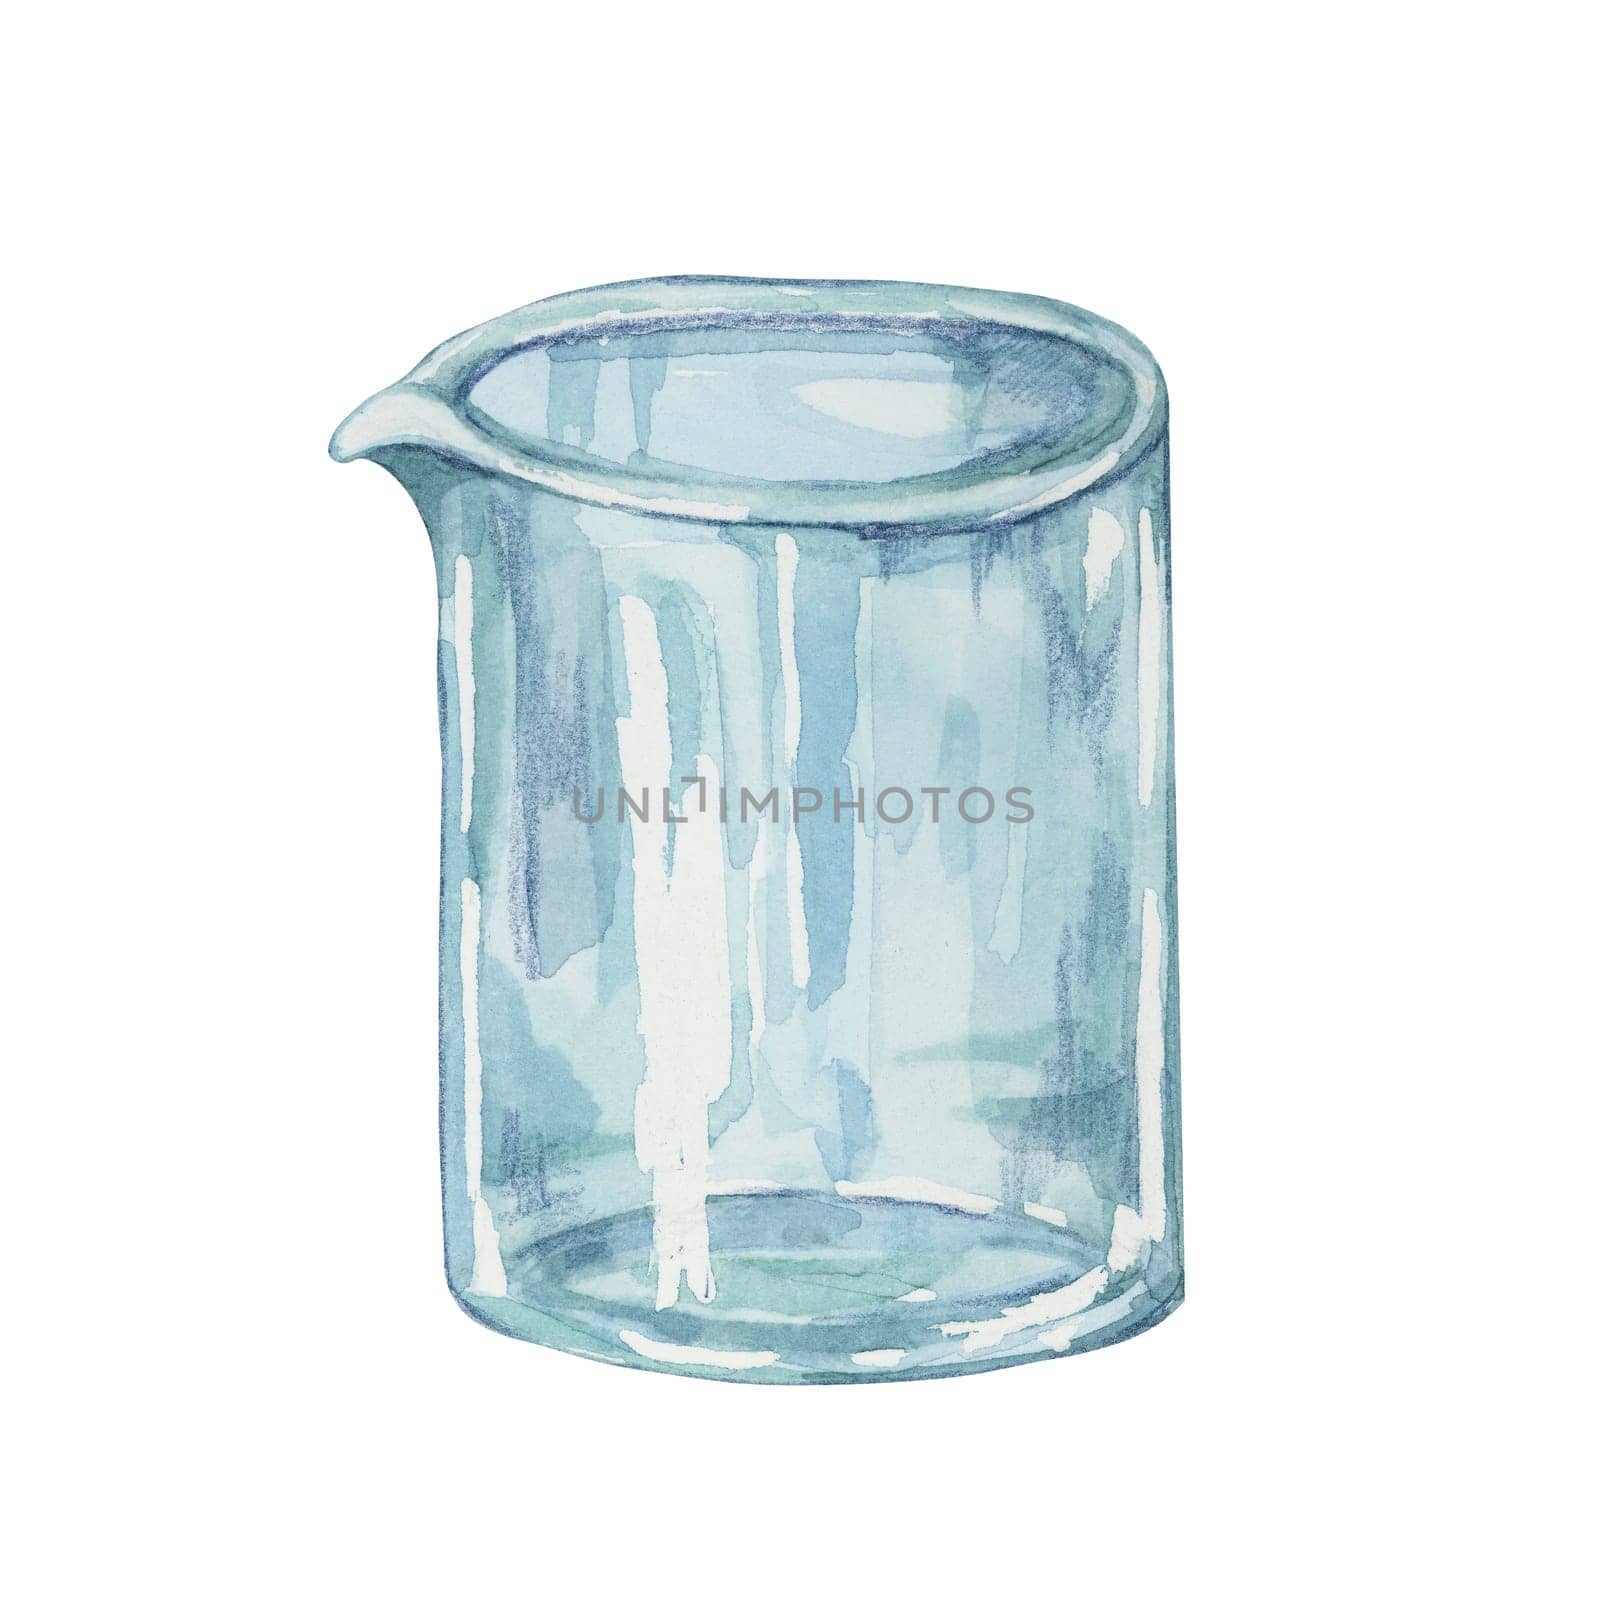 Empty glass beaker. Hand drawn watercolor illustration of chemistry, laboratory equipment. Cylinder glassware clipart for educational illustration in school lab, medical, pharmaceutical sciences